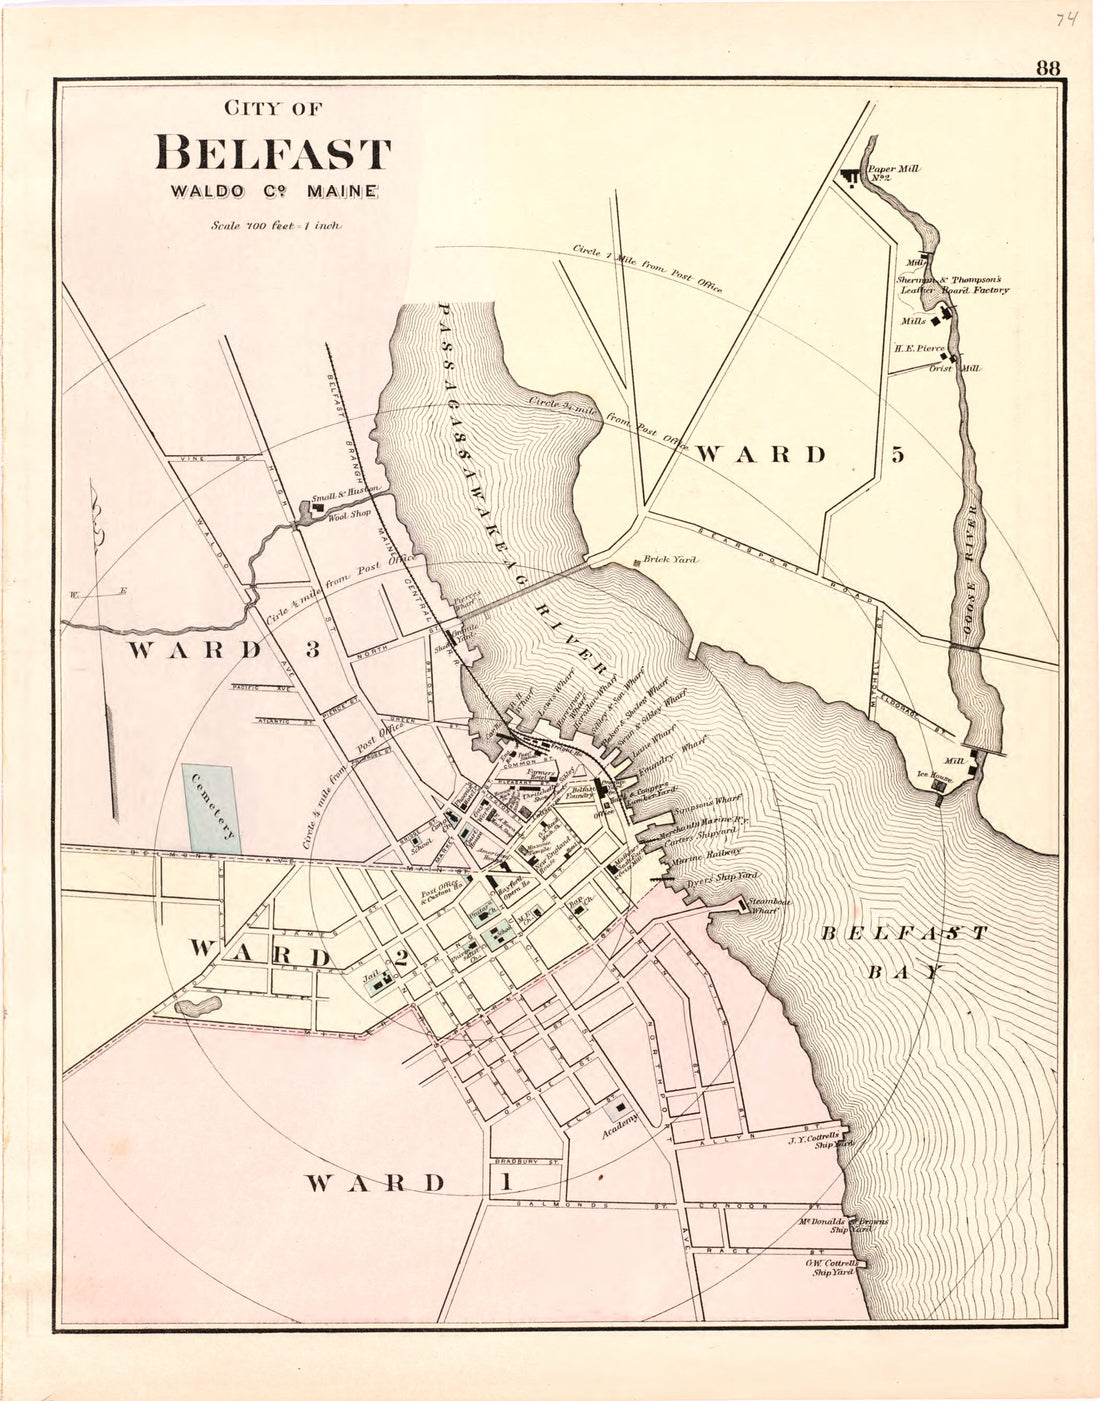 This hand drawn illustration (map) of City of Belfast Waldo Co. Maine from Colby&